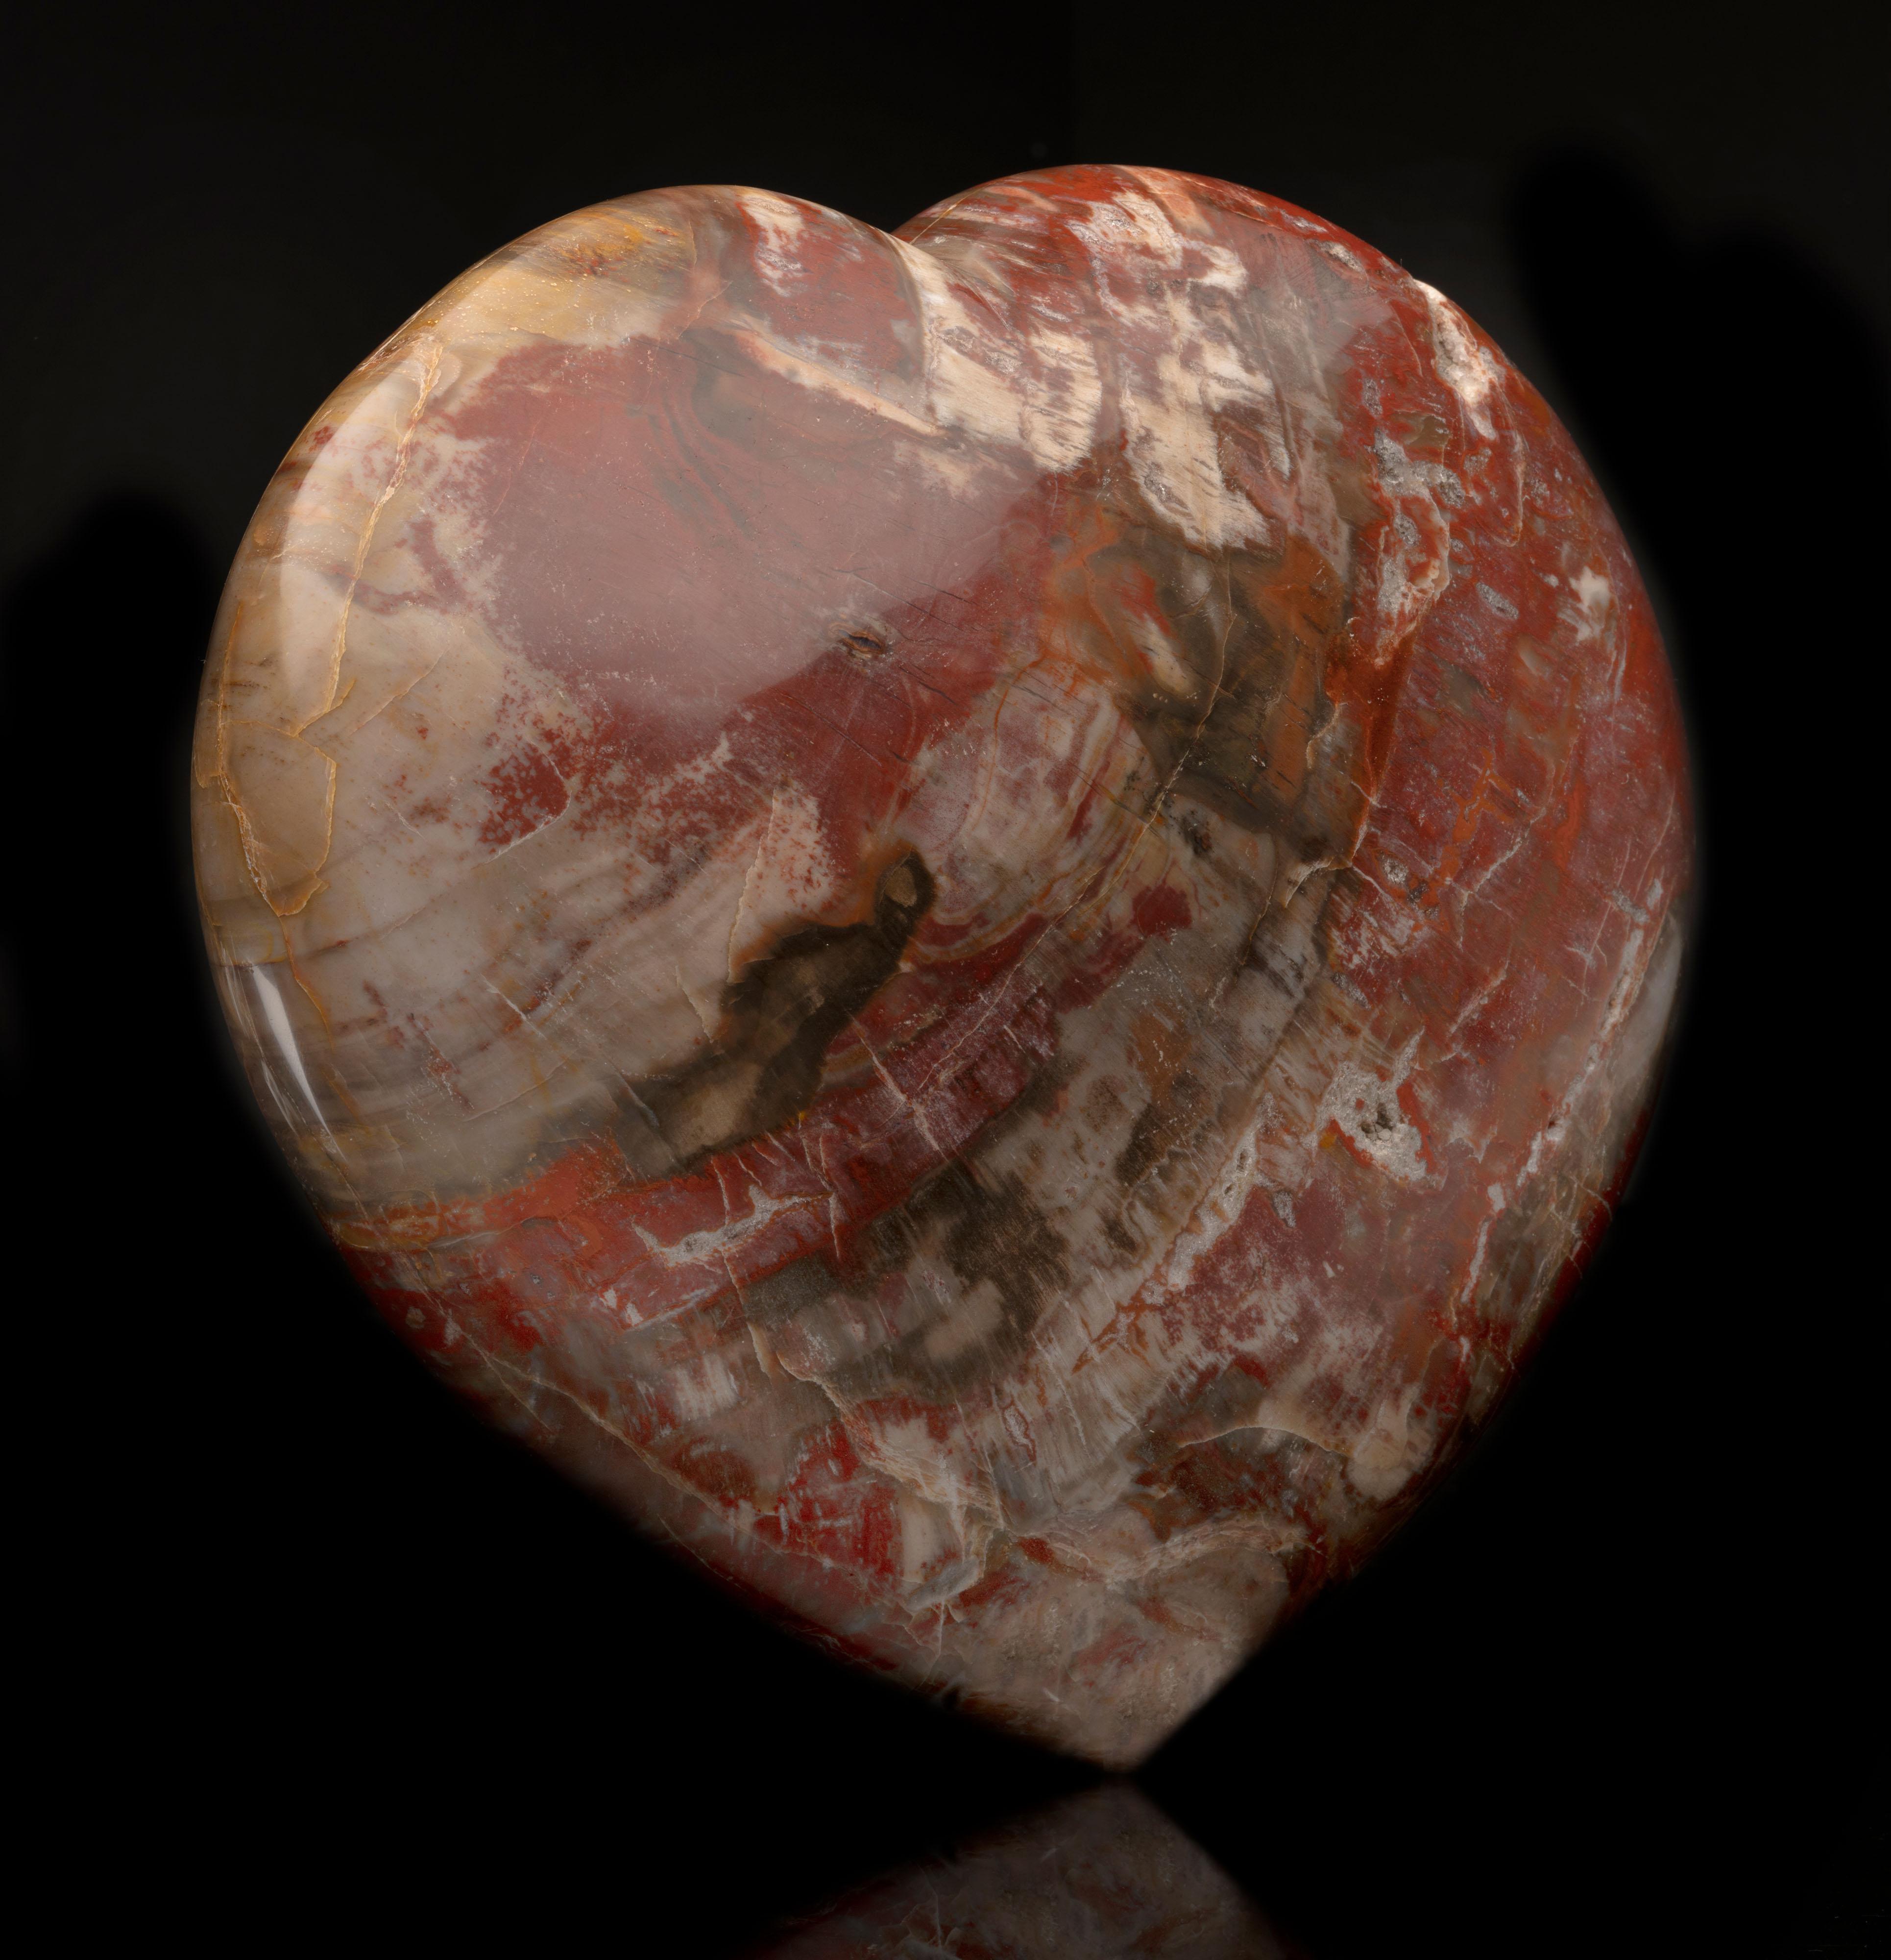 Approximately 220 million years old, this large 9-pound heart has been hand-carved and hand-polished out of genuine fossilized wood and displays sumptuous red, tan, and brown tones. Petrified wood from the forests of Madagascar is famous for its